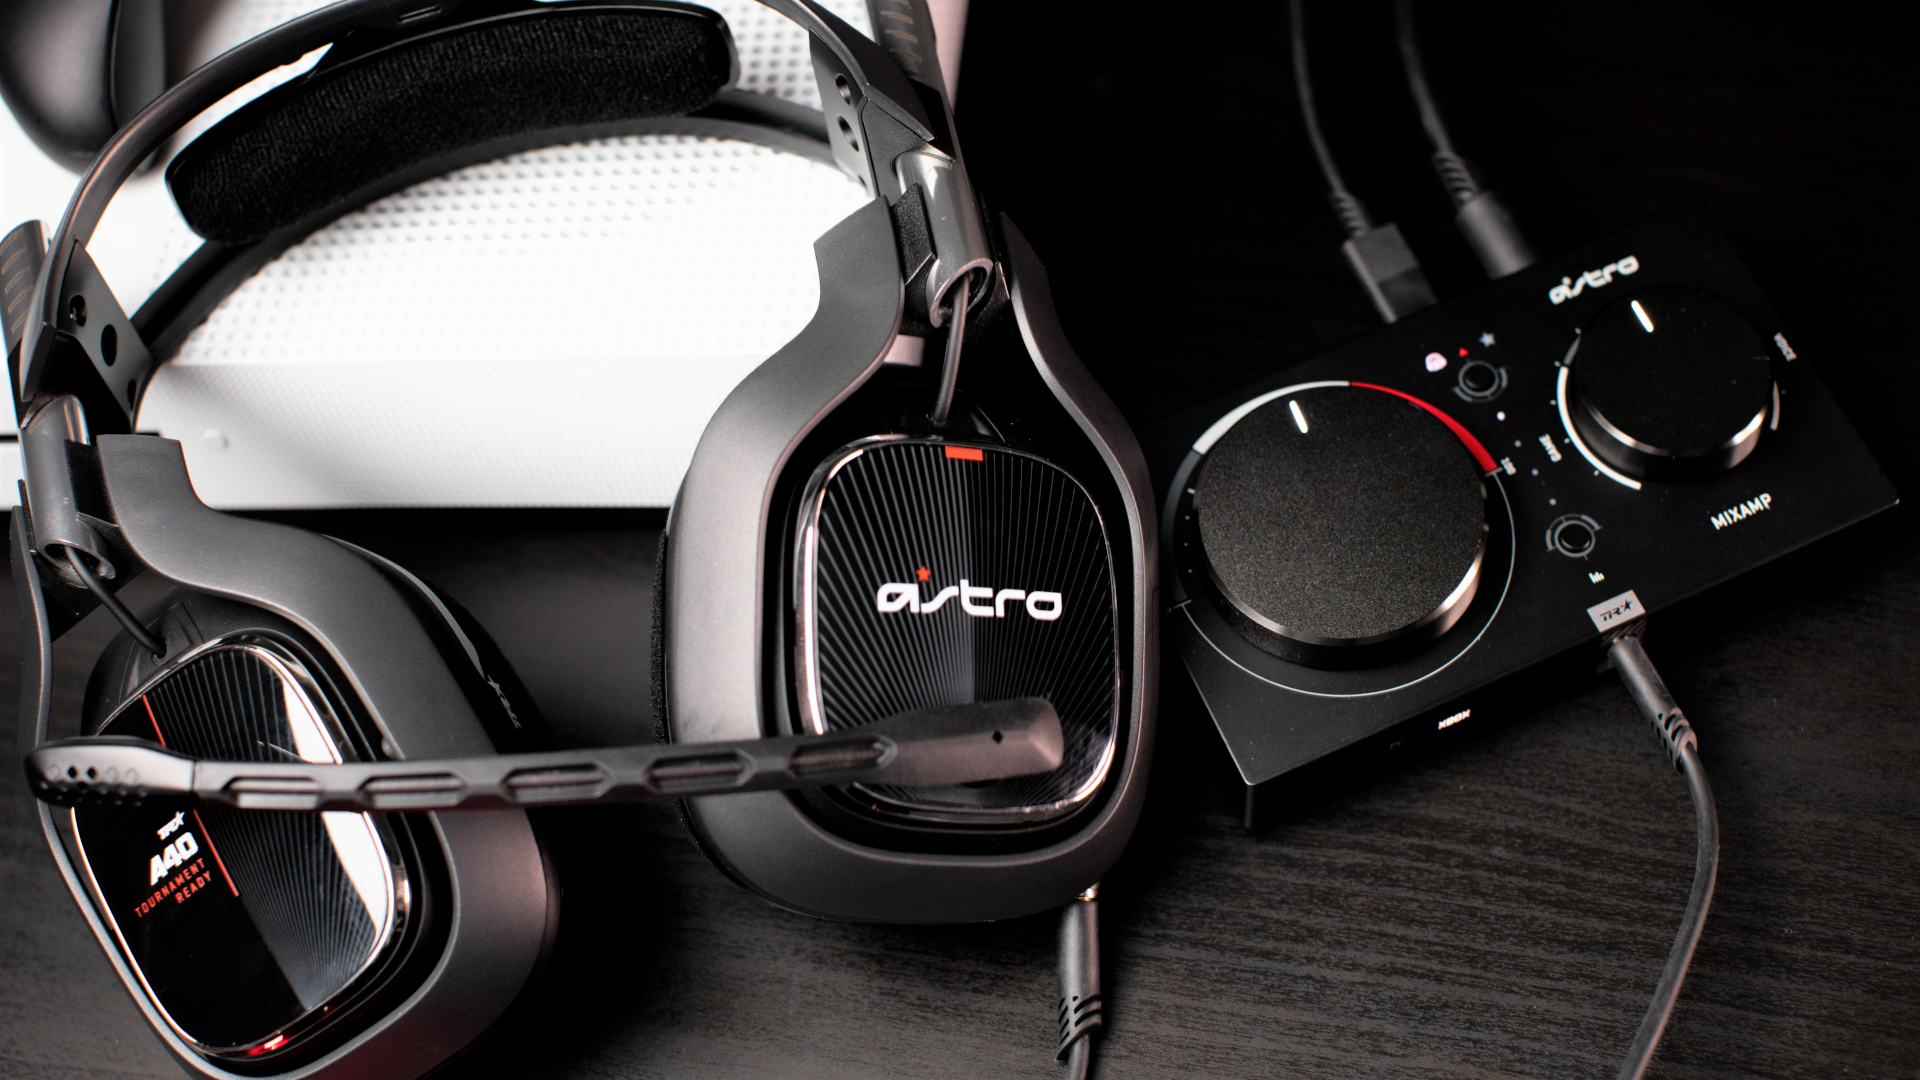 astro a40 without mixamp xbox one